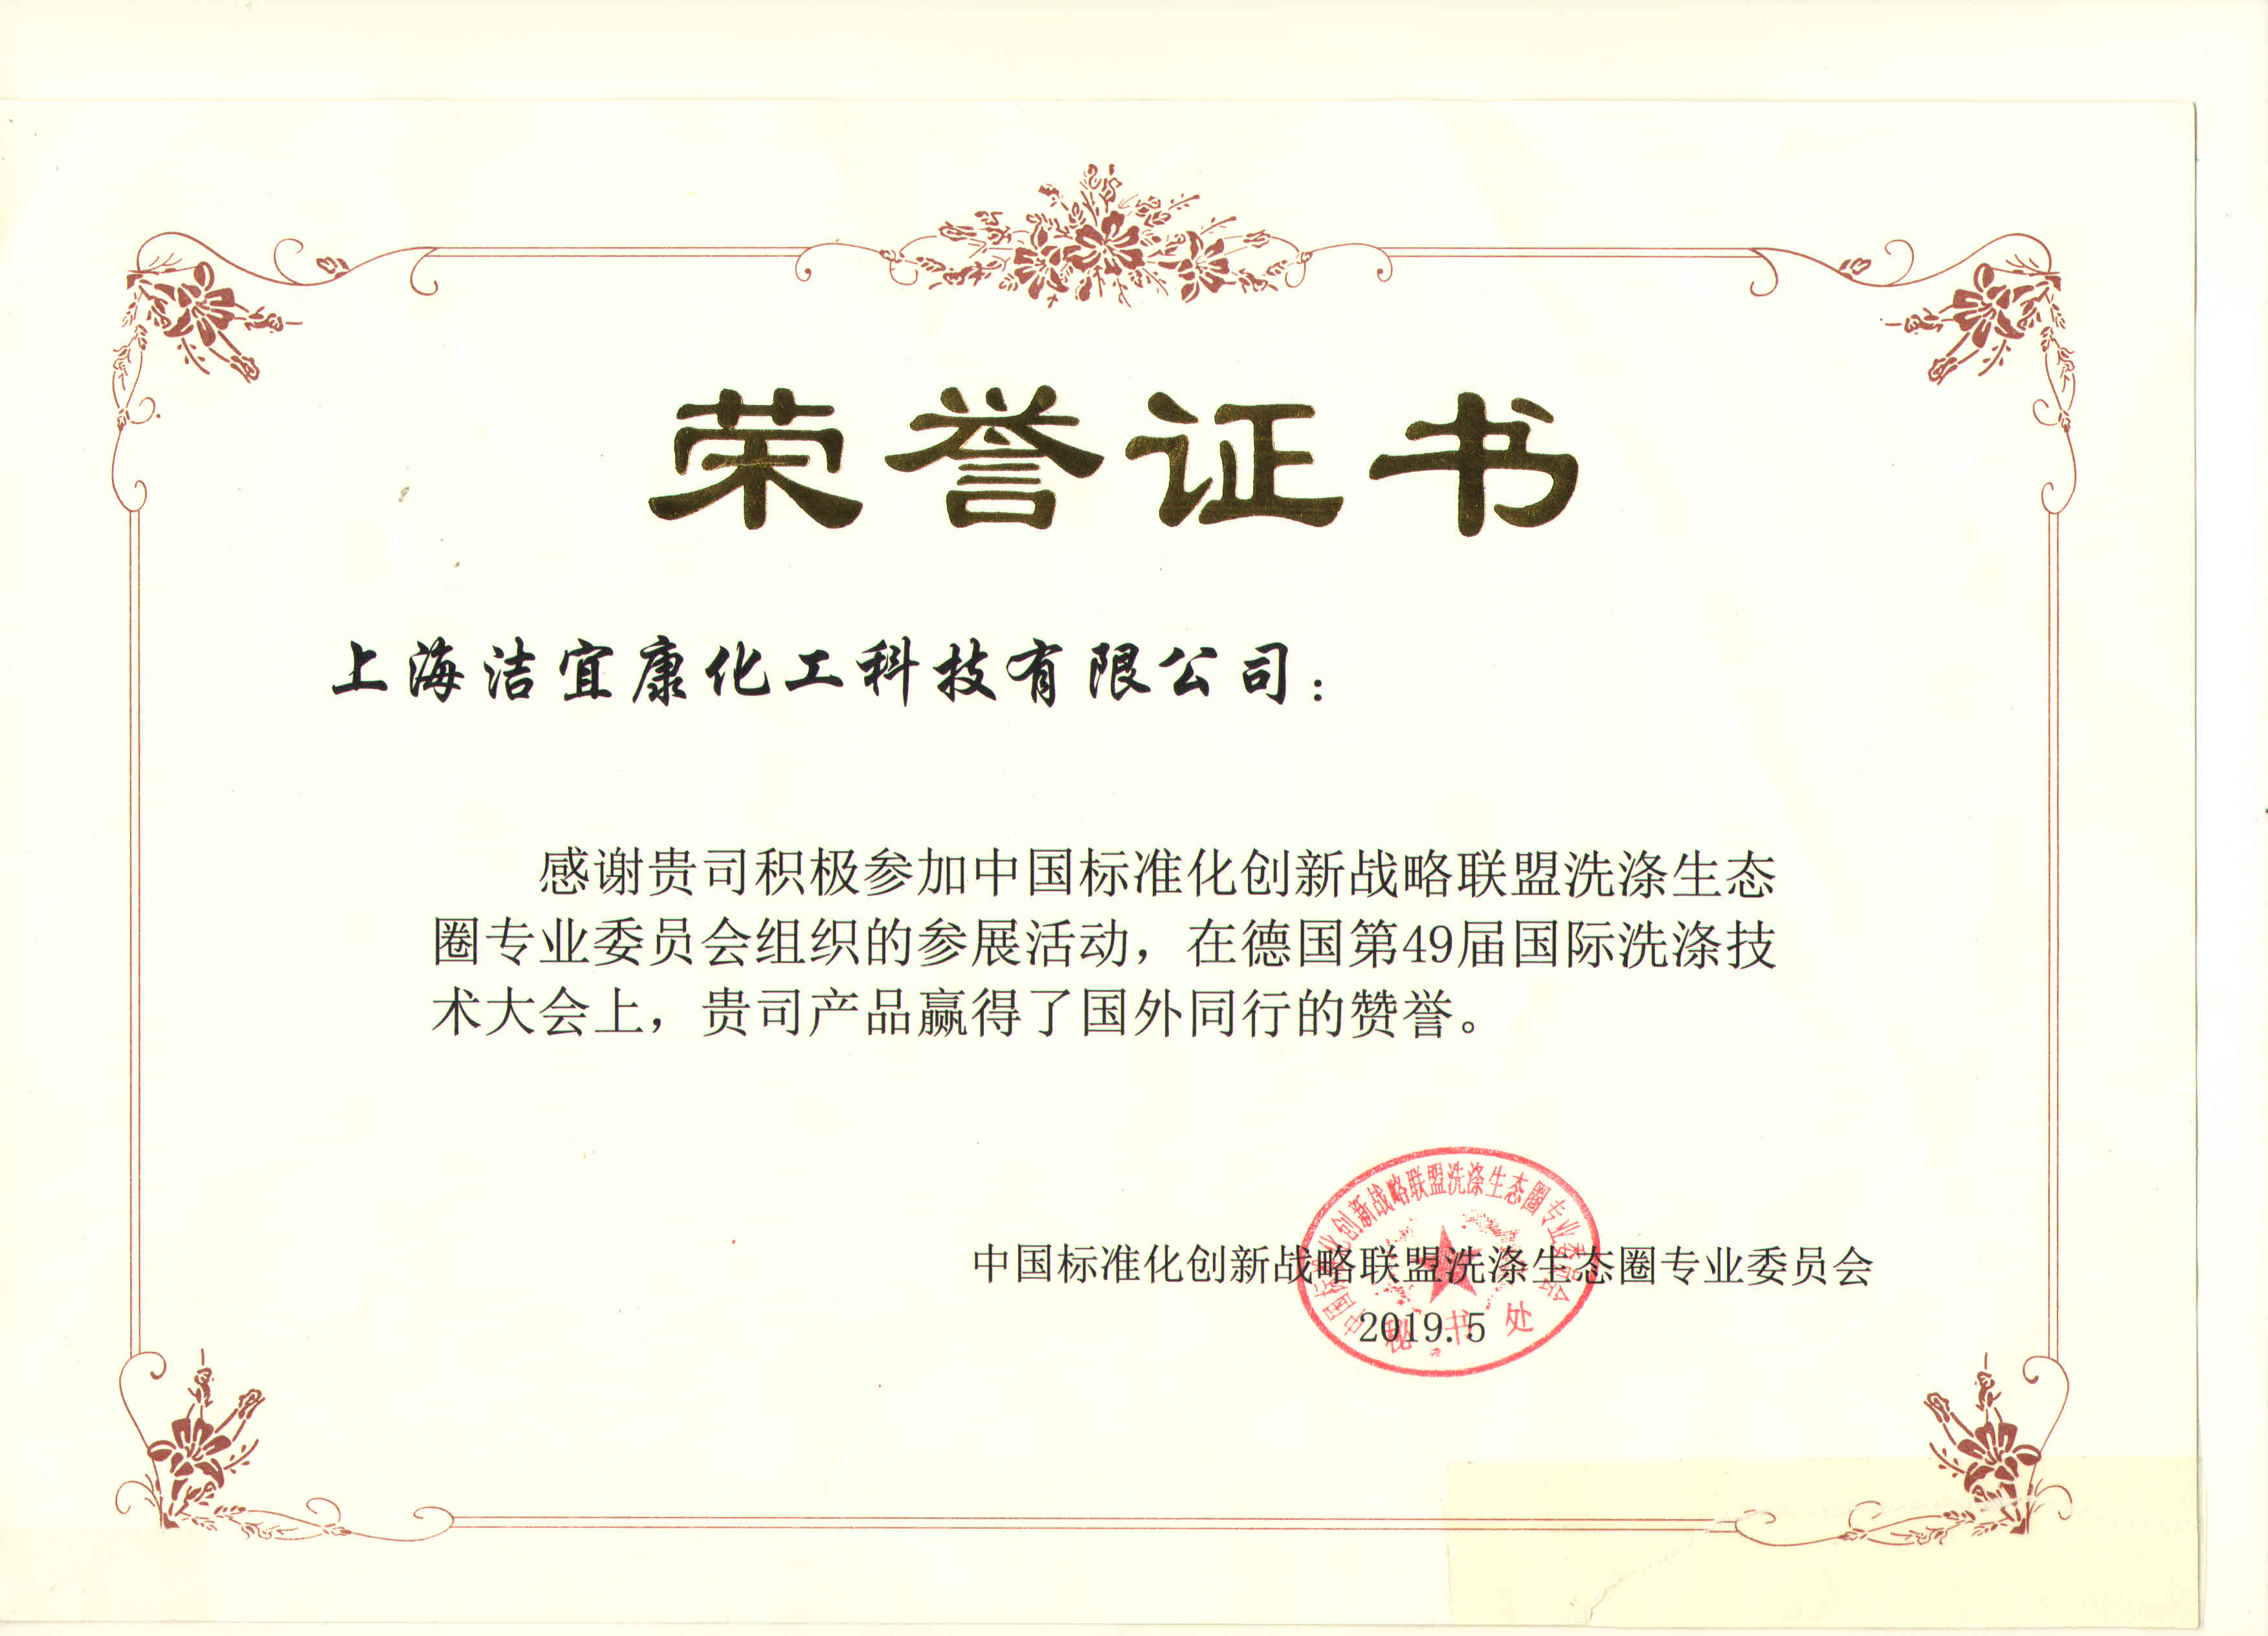 Certificate of participation in the Professional Committee of Washing Ecosphere, China Standardization Innovation